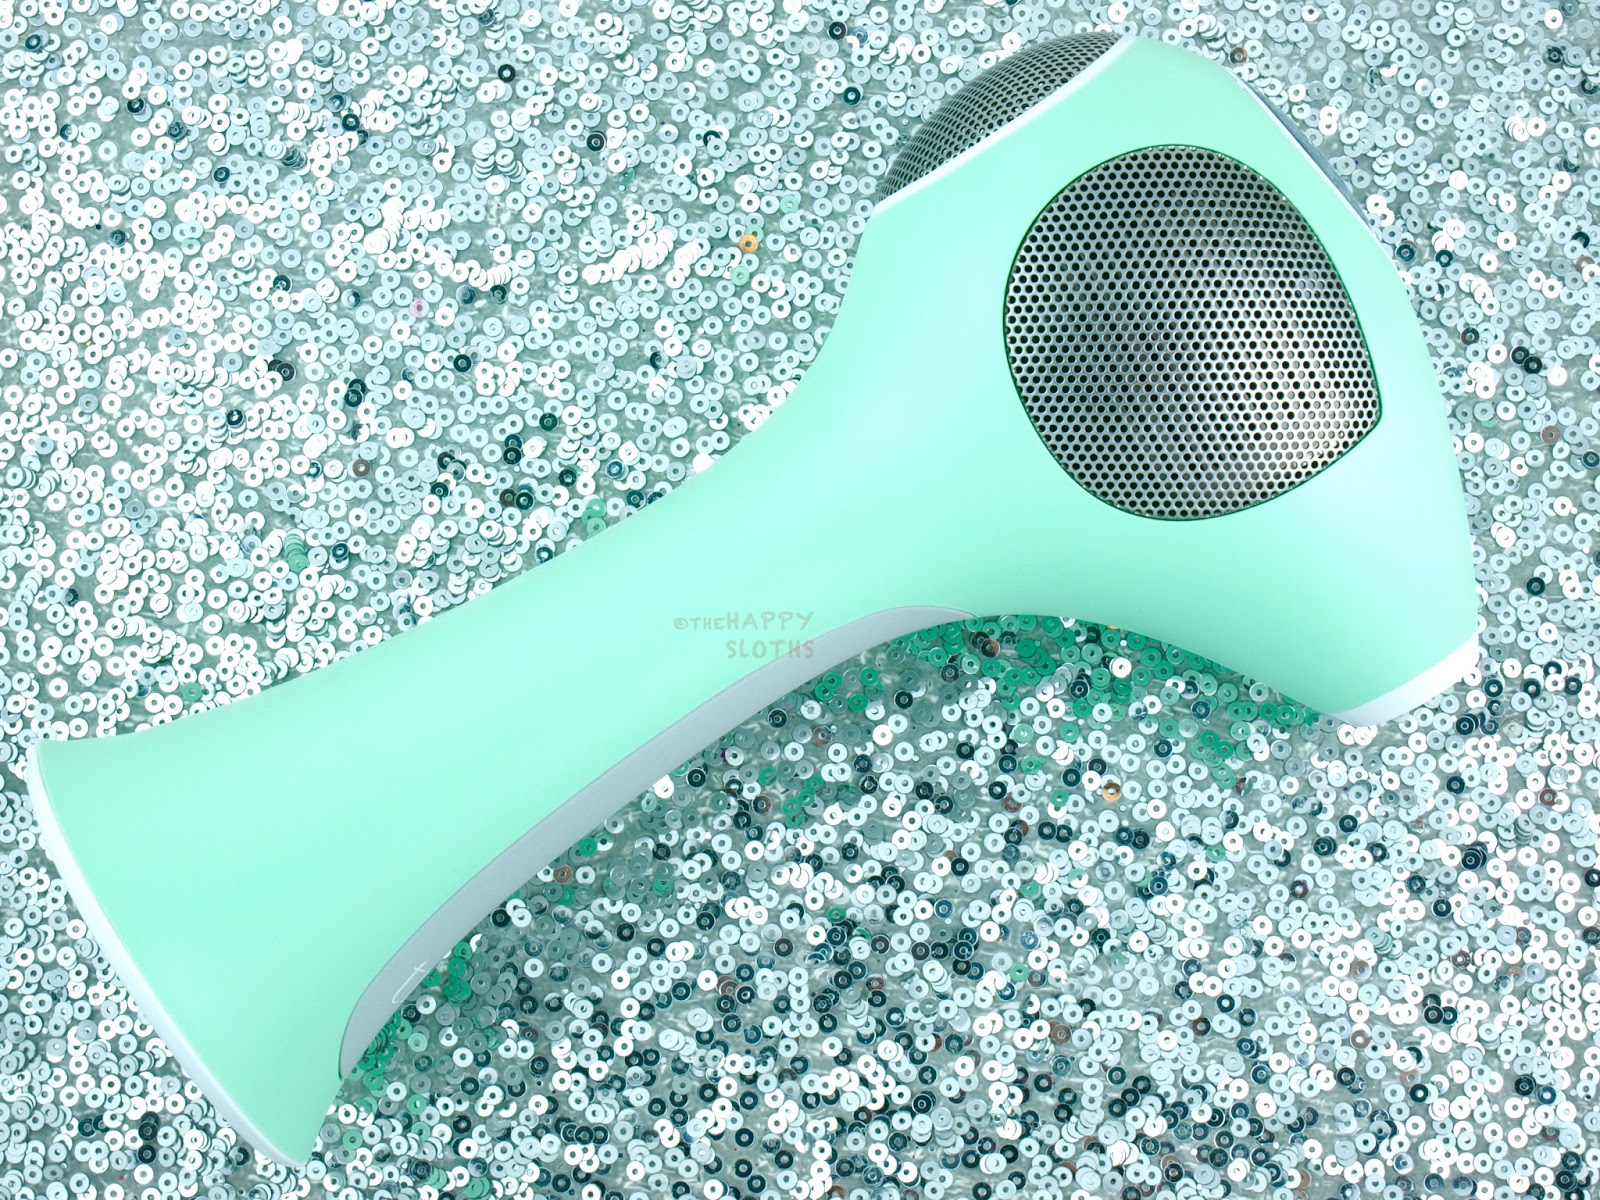 Tria Hair Removal Laser 4X: Review